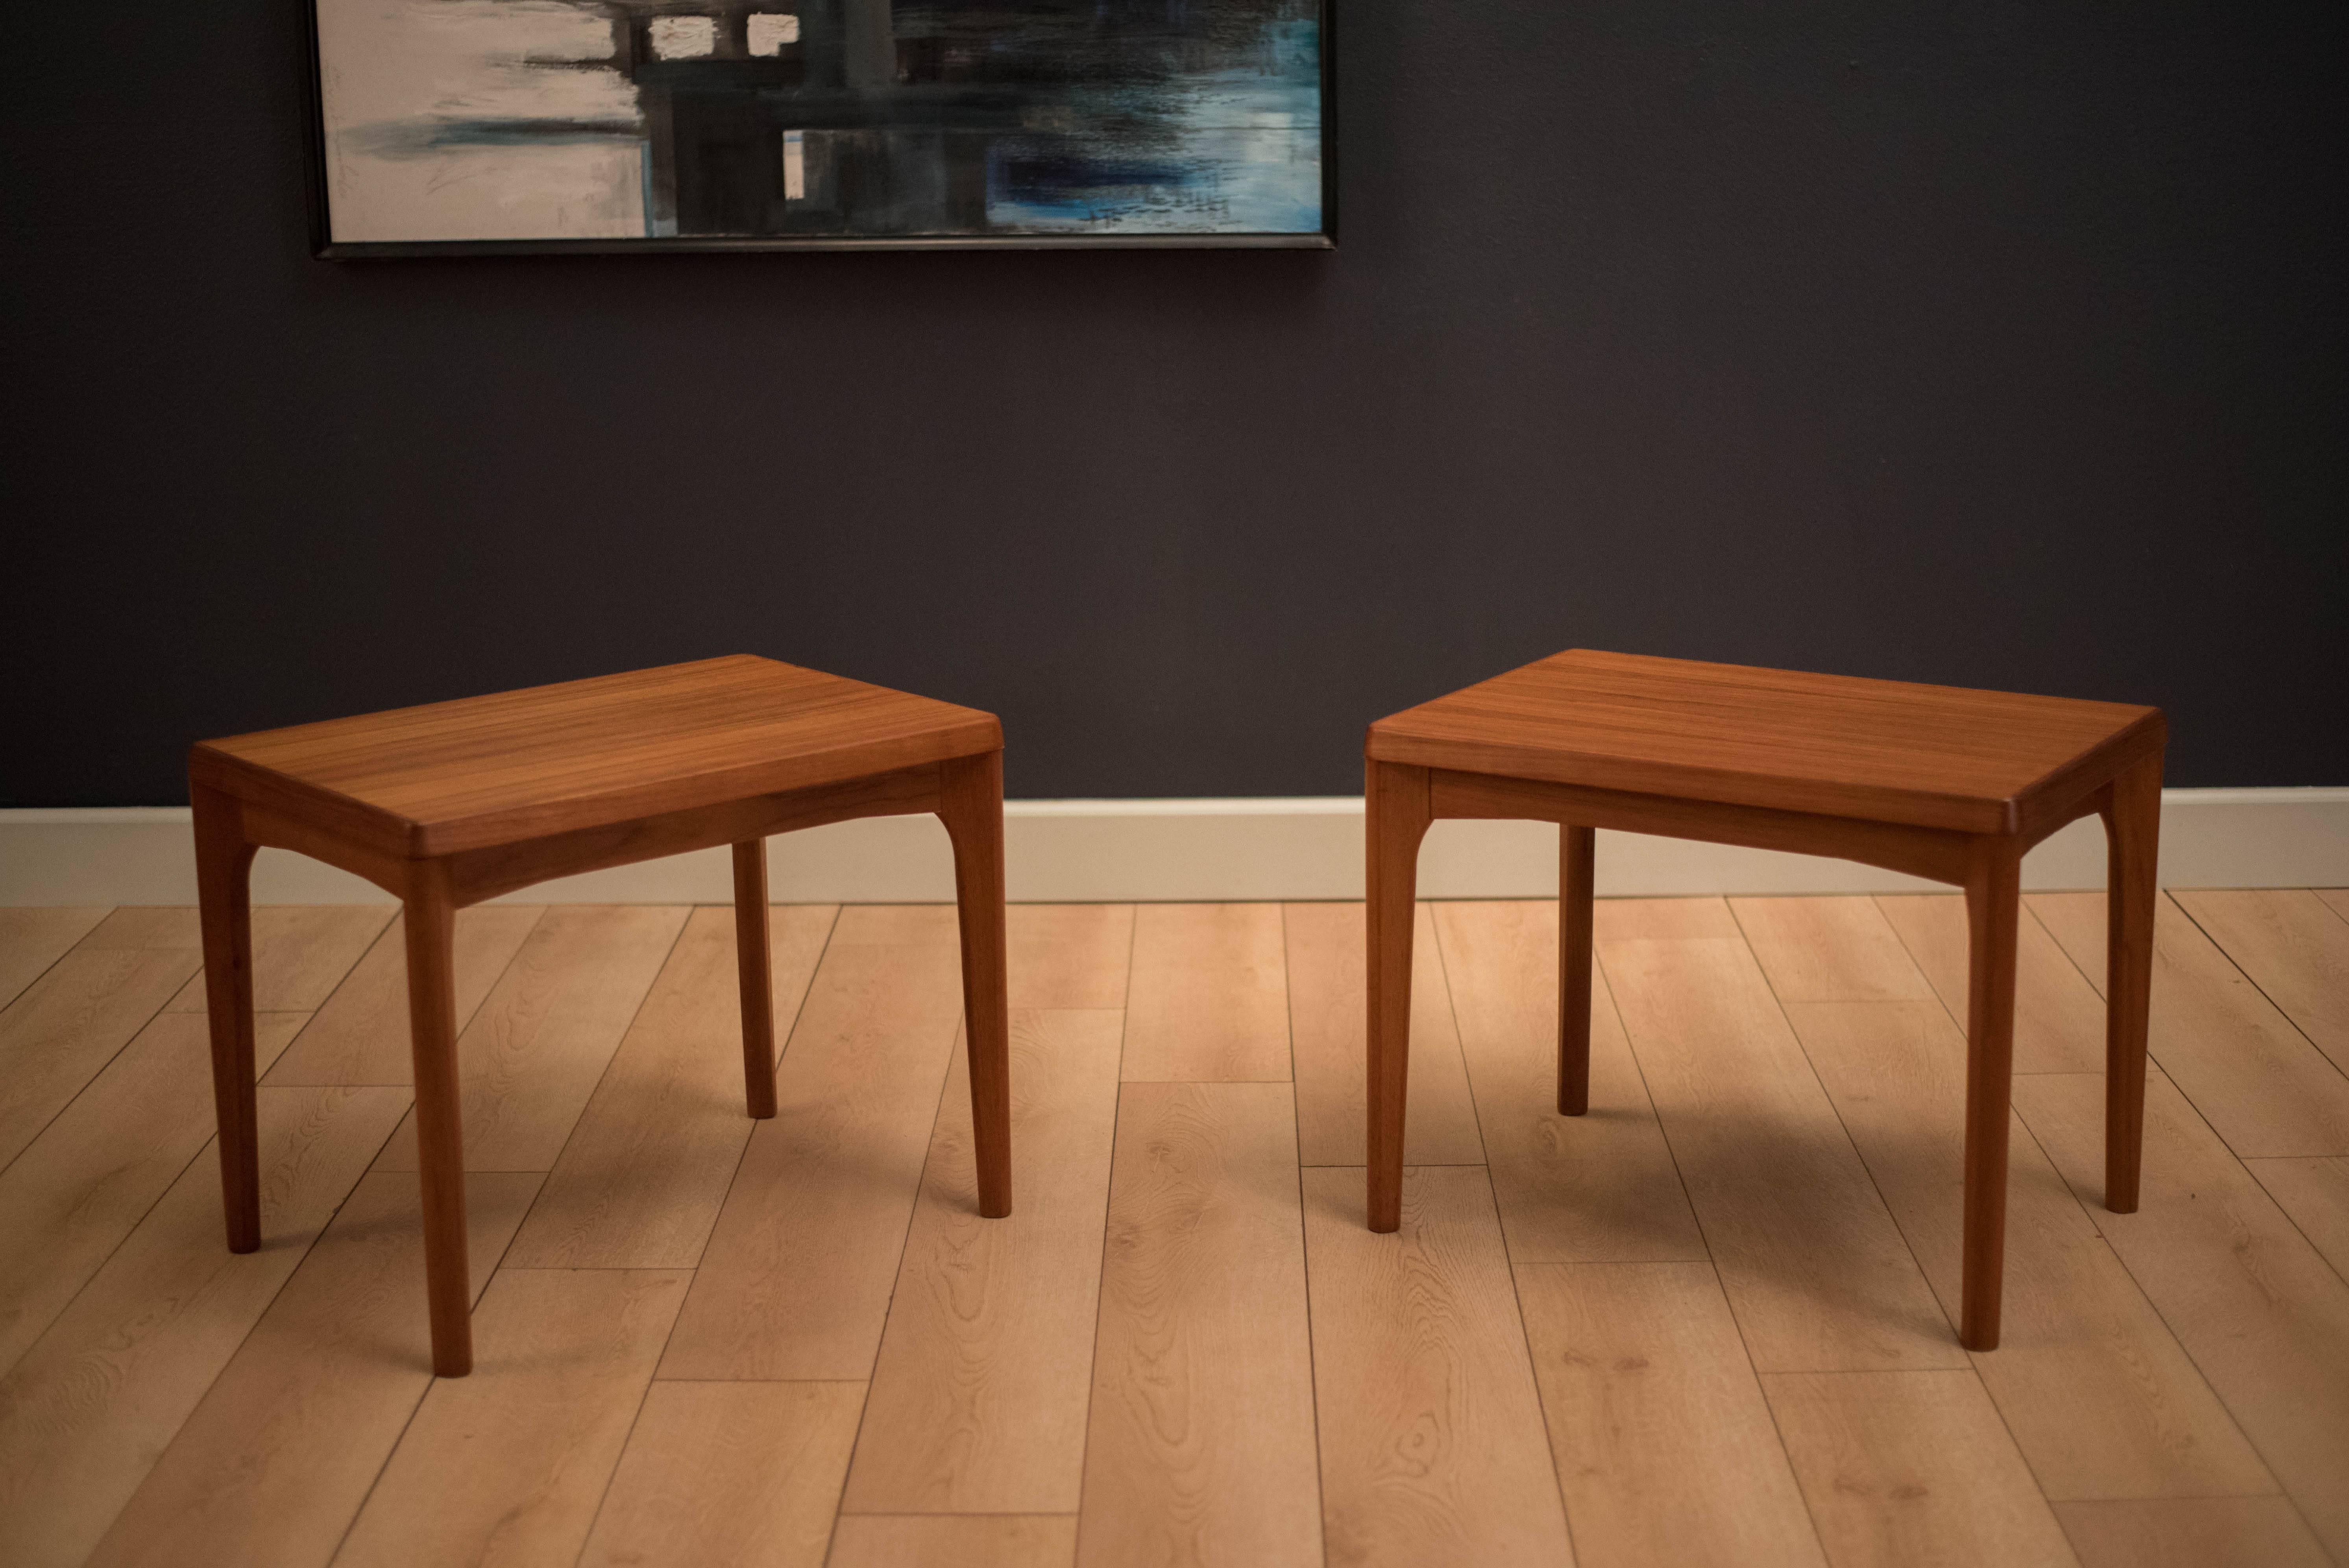 Midcentury pair of side tables designed by Henning Kjaernulf for Vejle Stole-og Mobelfabrik in teak. This set features sculptural edges and sleek angled tapered legs. Price is for the pair.